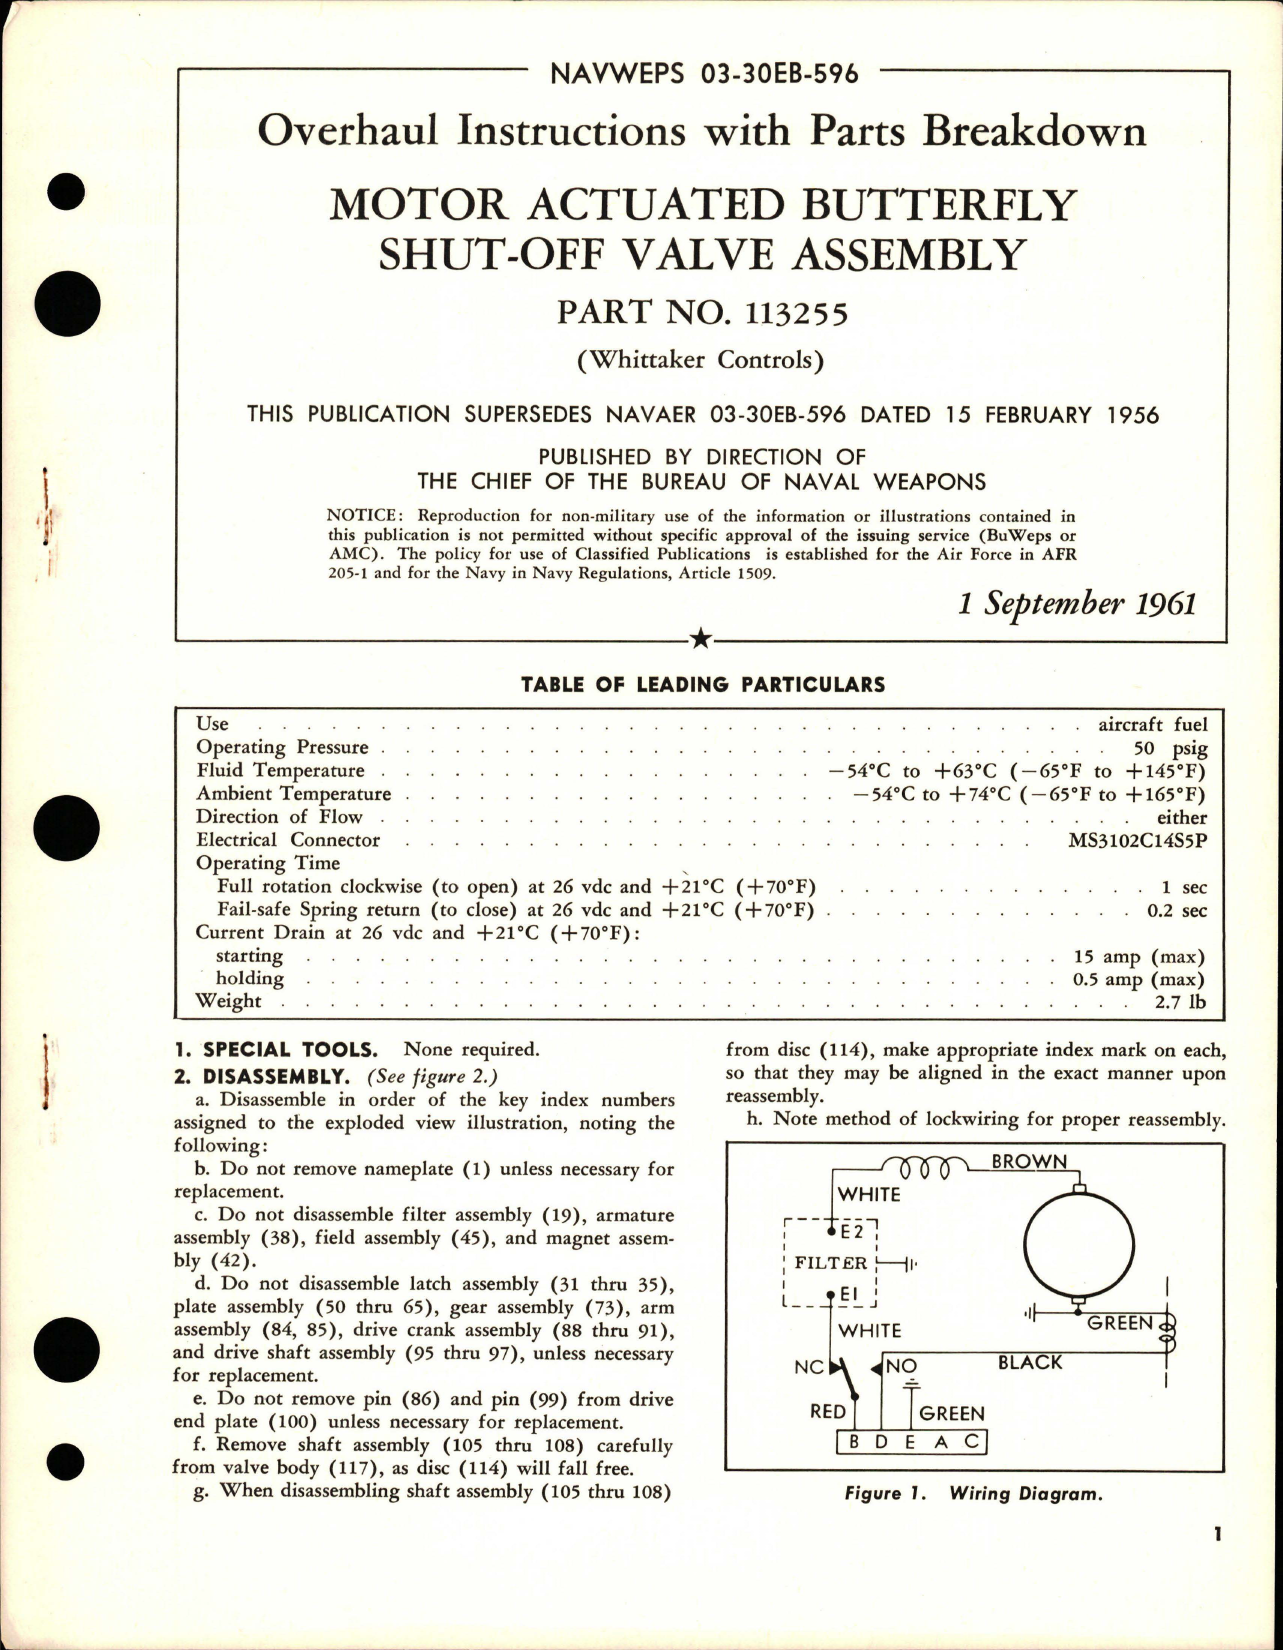 Sample page 1 from AirCorps Library document: Overhaul Instructions with Parts Breakdown for Motor Actuated Butterfly Shut-Off Valve Assembly - Part 113255